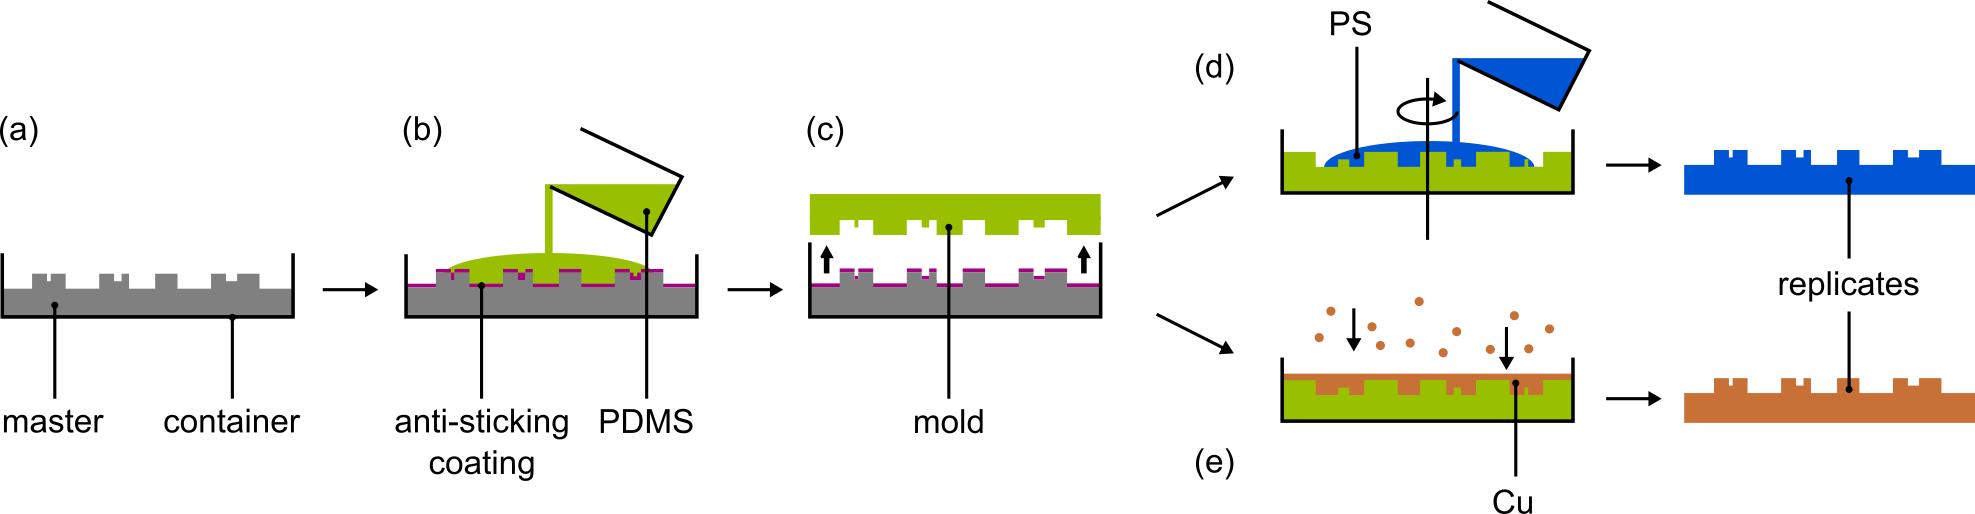 Replication procedure. (a) The Si master is placed in a container and coated with an anti-sticking coating before (b) PDMS is poured onto it. (c) After solidification, the PDMS is removed and can then be used as a mould to either create (d) a PS replicate by spin coating or (e) a Cu replicate by thermal evaporation followed by electroplating.